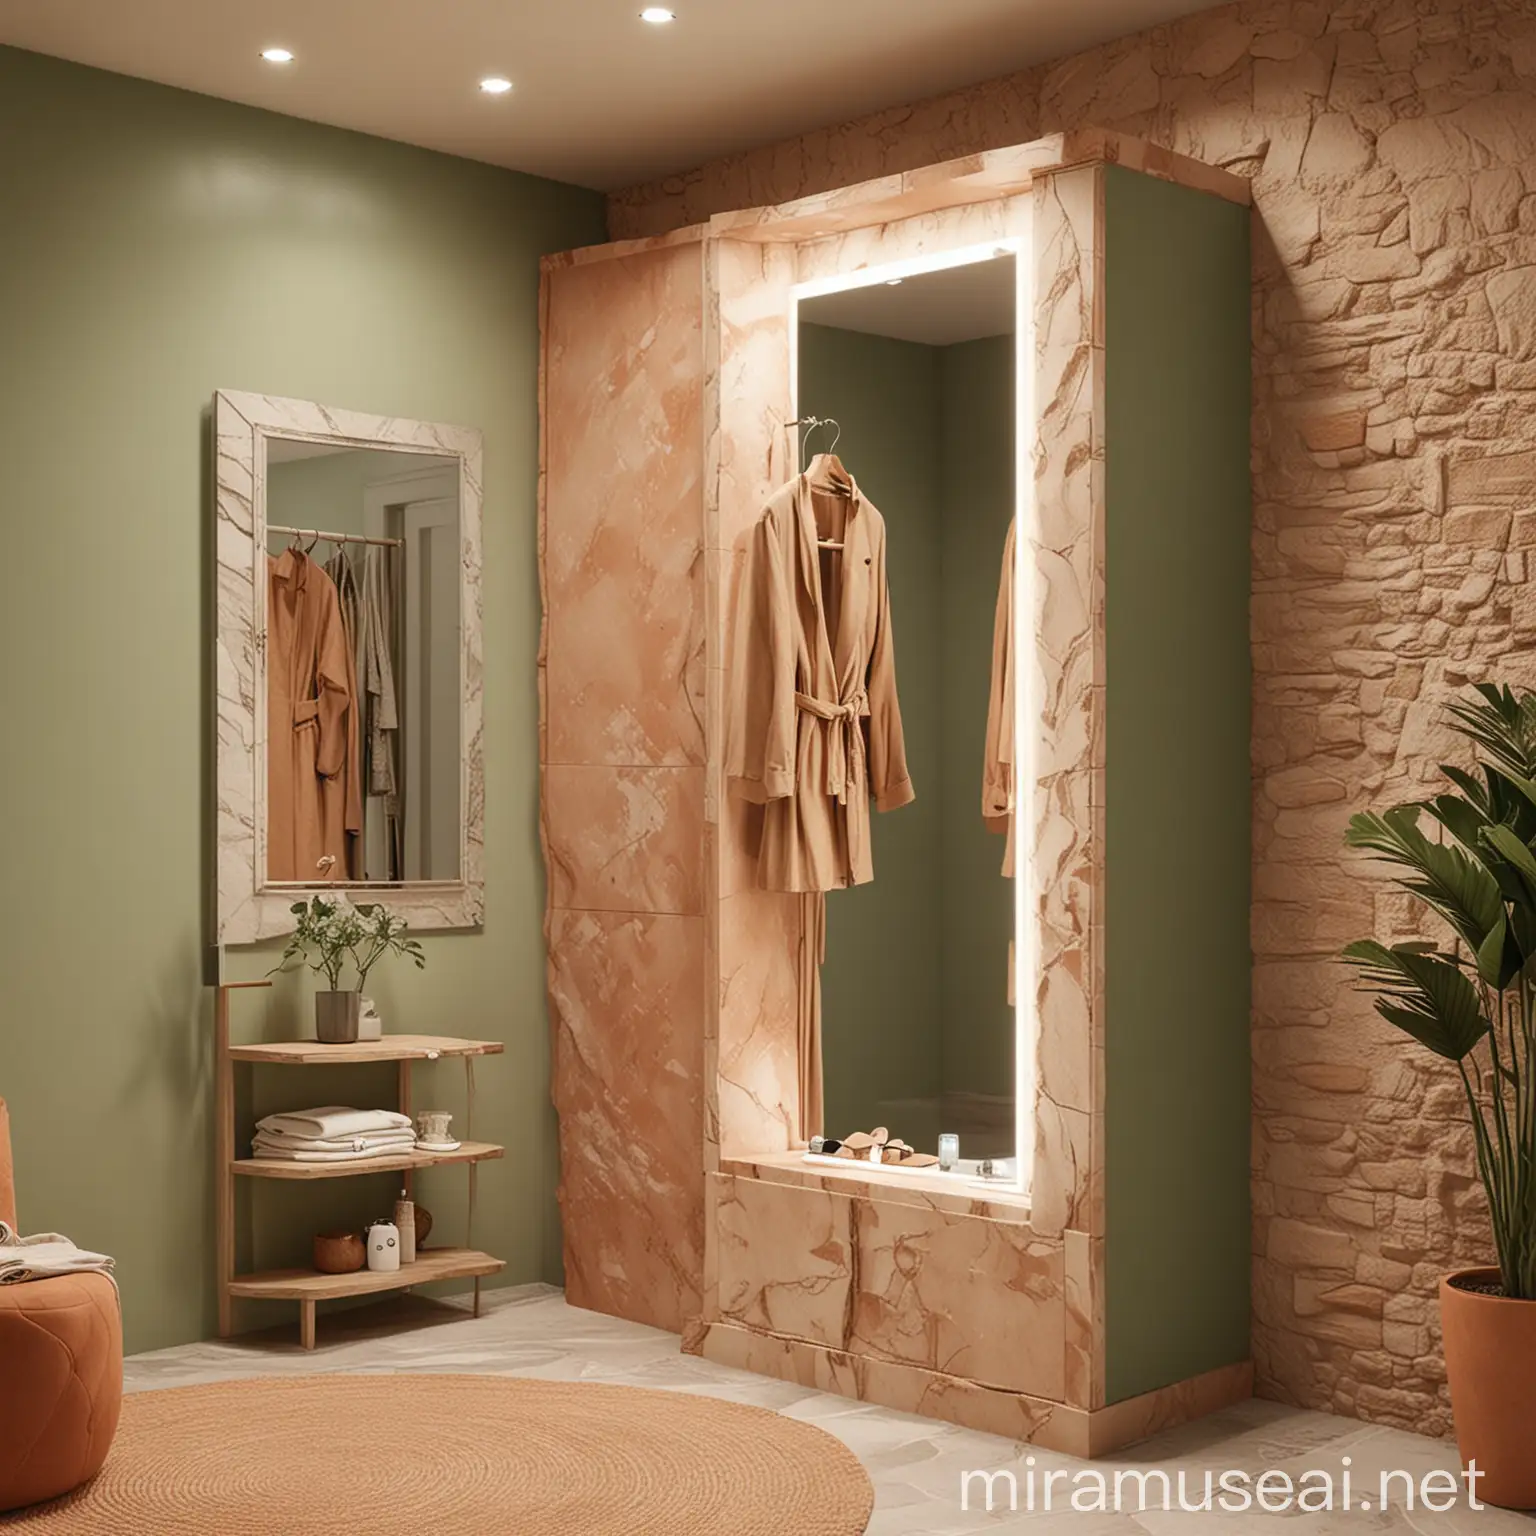 We are a premium brand, Vista Mare, a Mediterranean brand. we would like an intimate, comfortable fitting room with a virtual touch screen mirror that represents your silhouette in 3D avatar. a warm interior, with stone, warm tones like pastel green beige, a little terracotta color give me a picture 